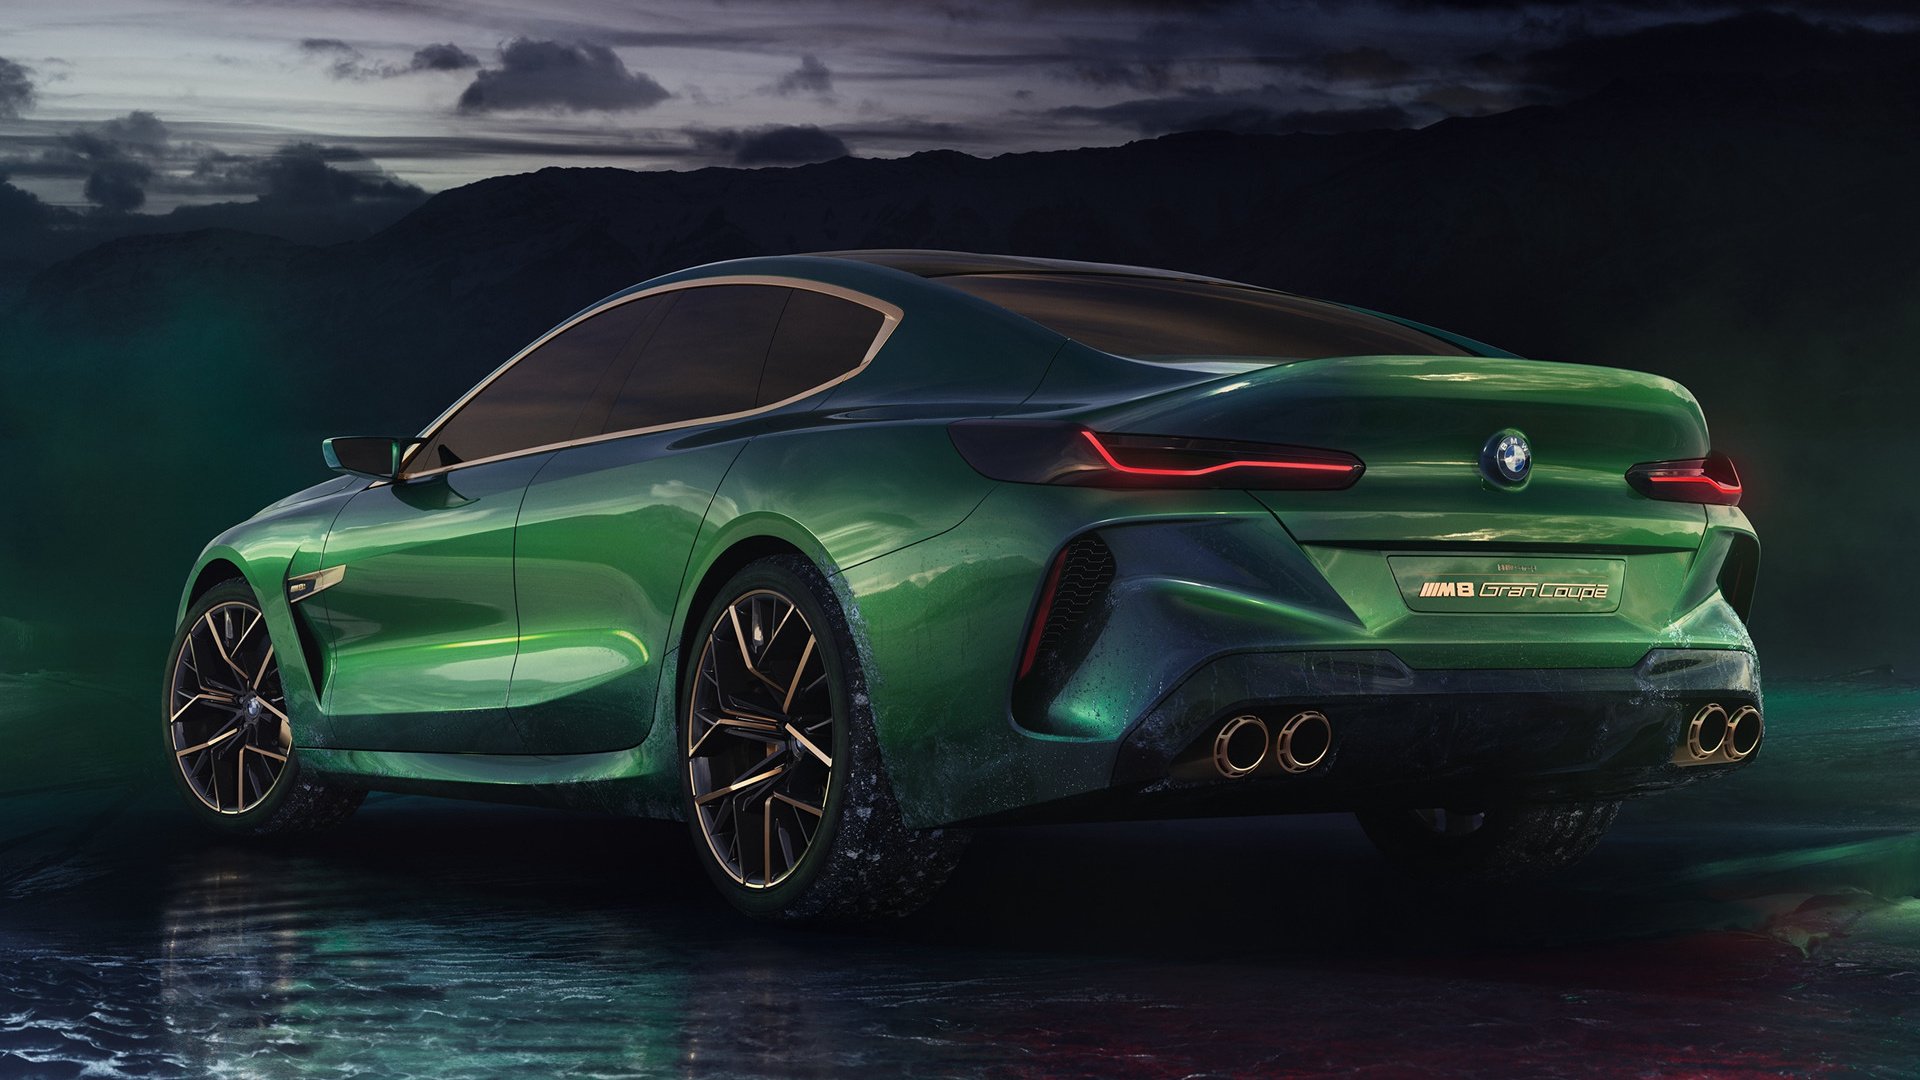 Bmw Concept M8 Gran Coupe HD Wallpaper Background Image